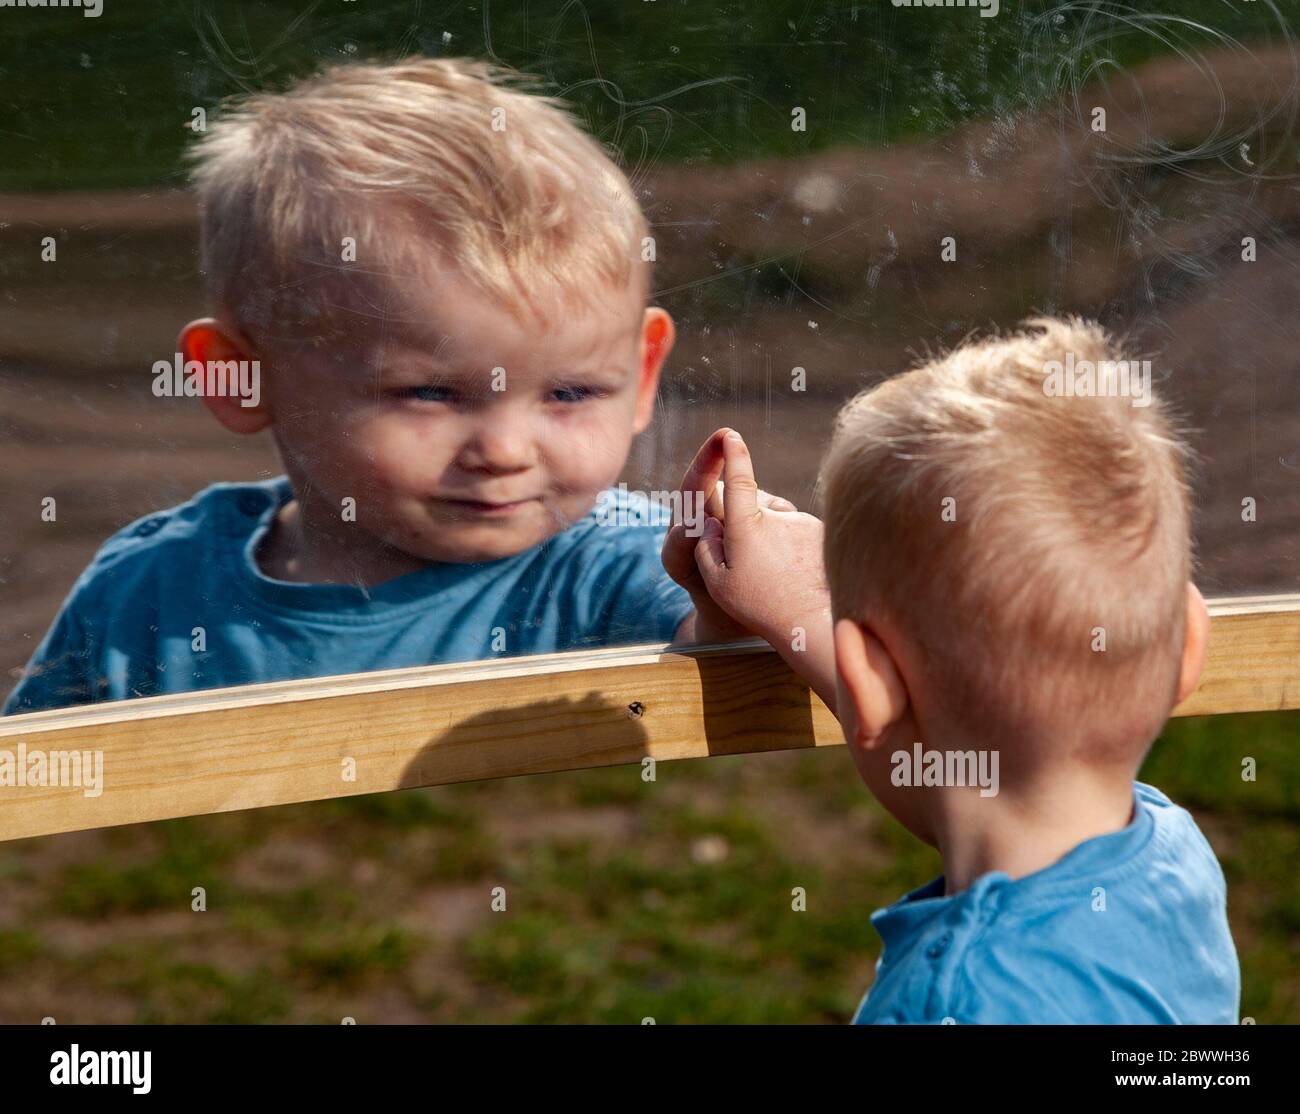 2 year old toddler boy pointing at his reflection in a playground mirror UK Stock Photo